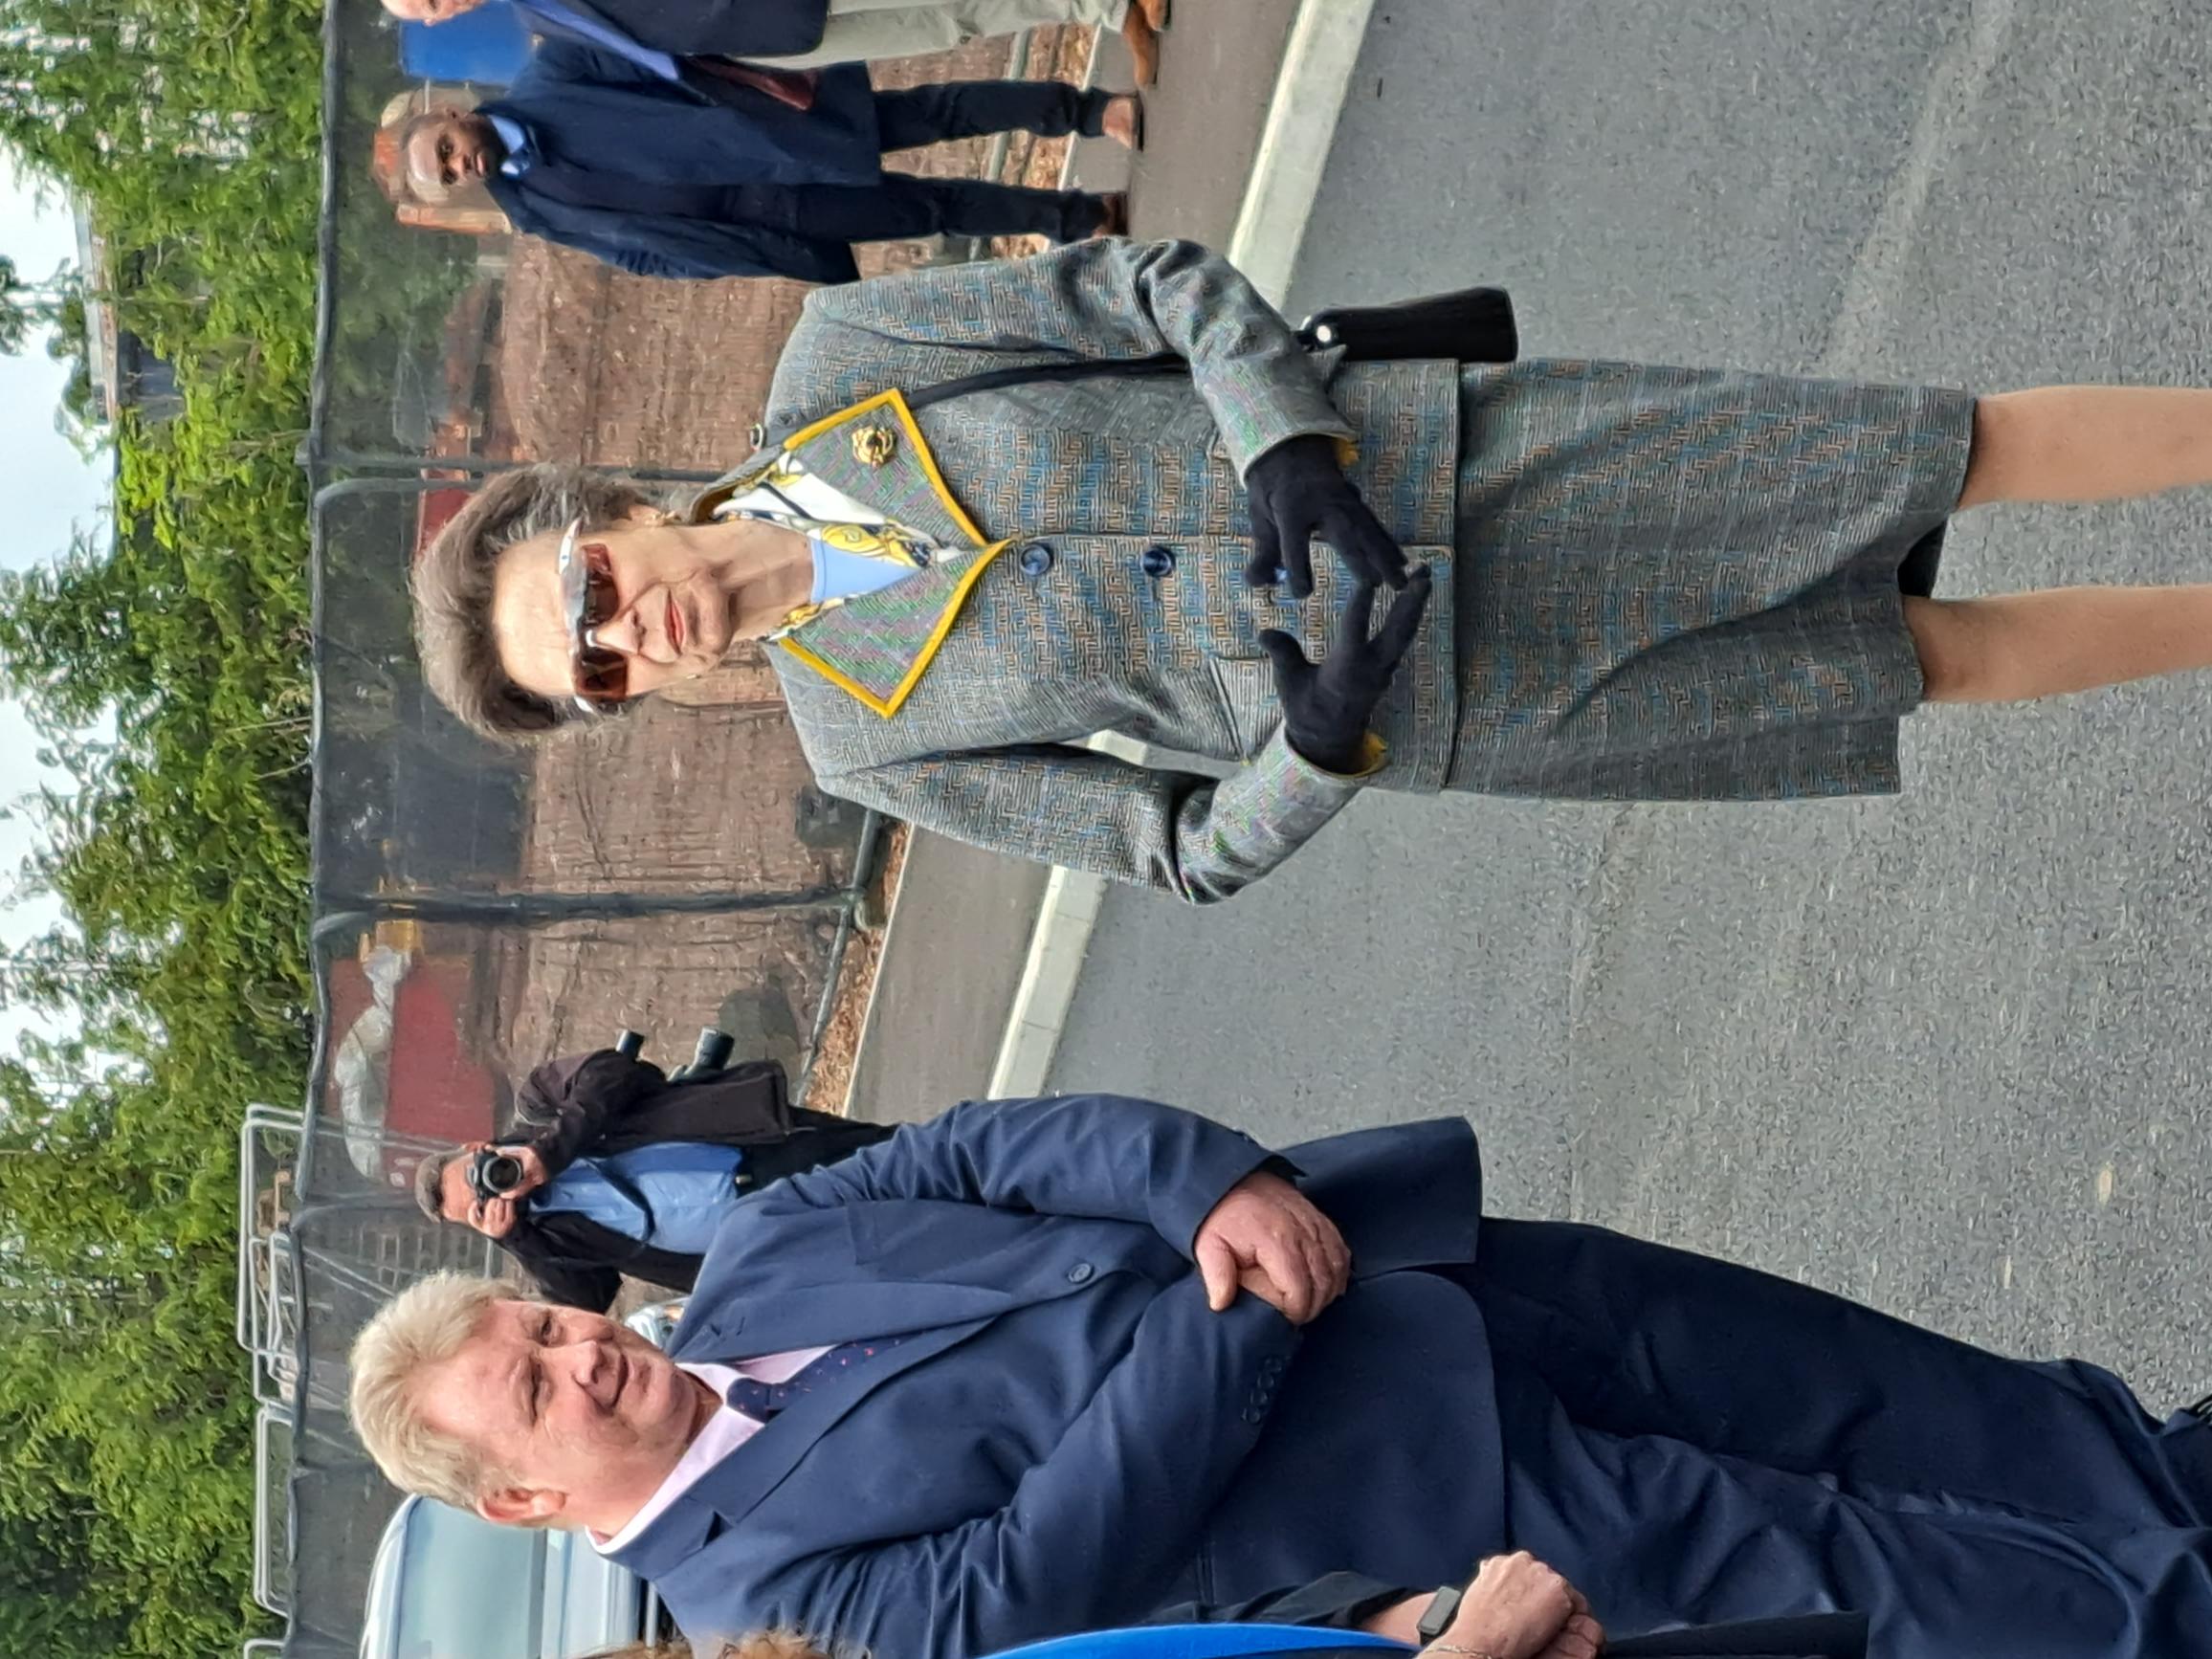 May 12th In Coleford for HRH Princess Anne's visit. 